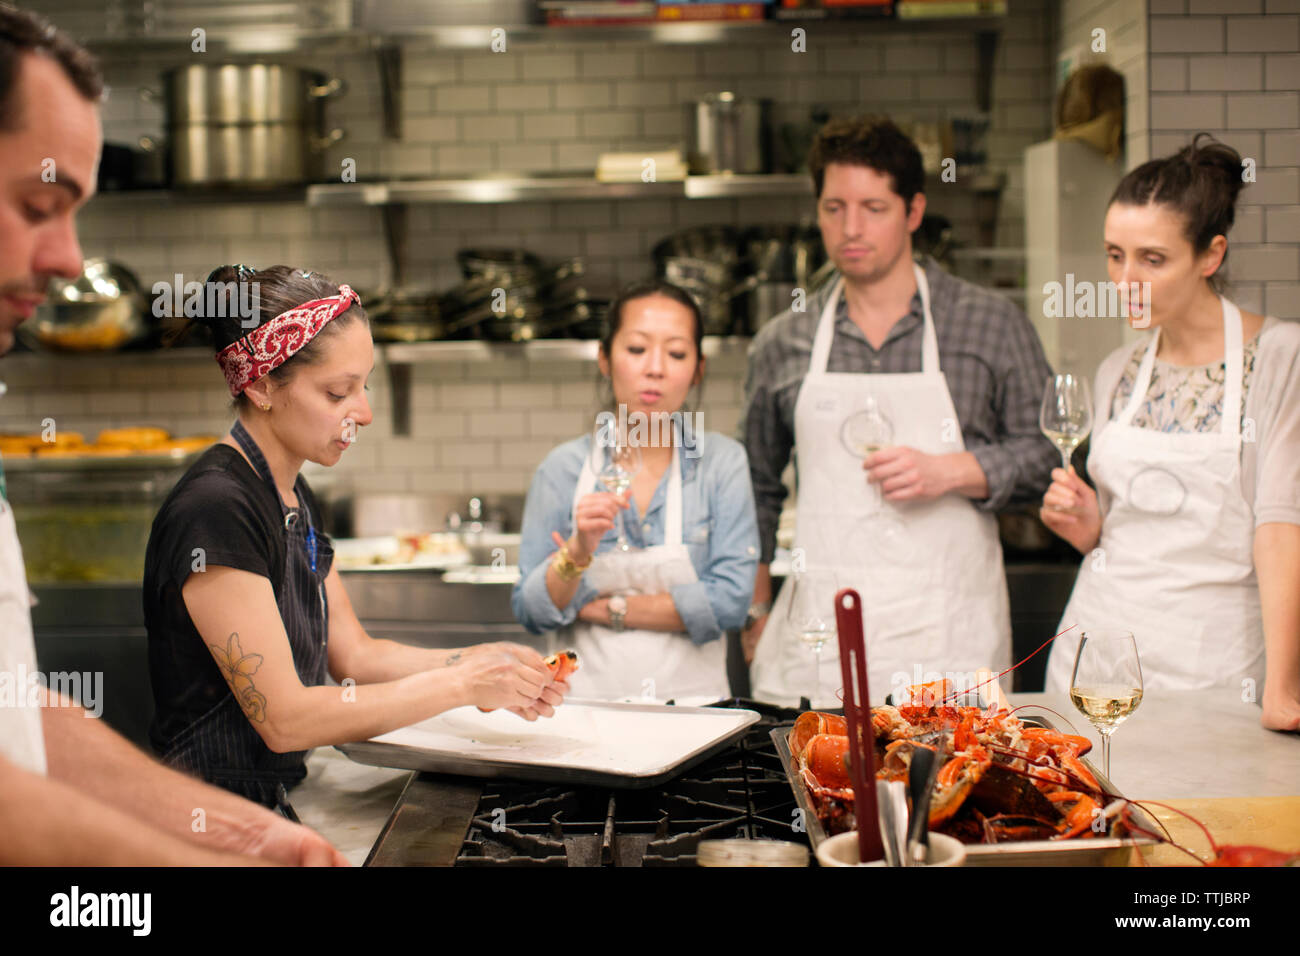 Students looking at female chef preparing food at commercial kitchen Stock Photo